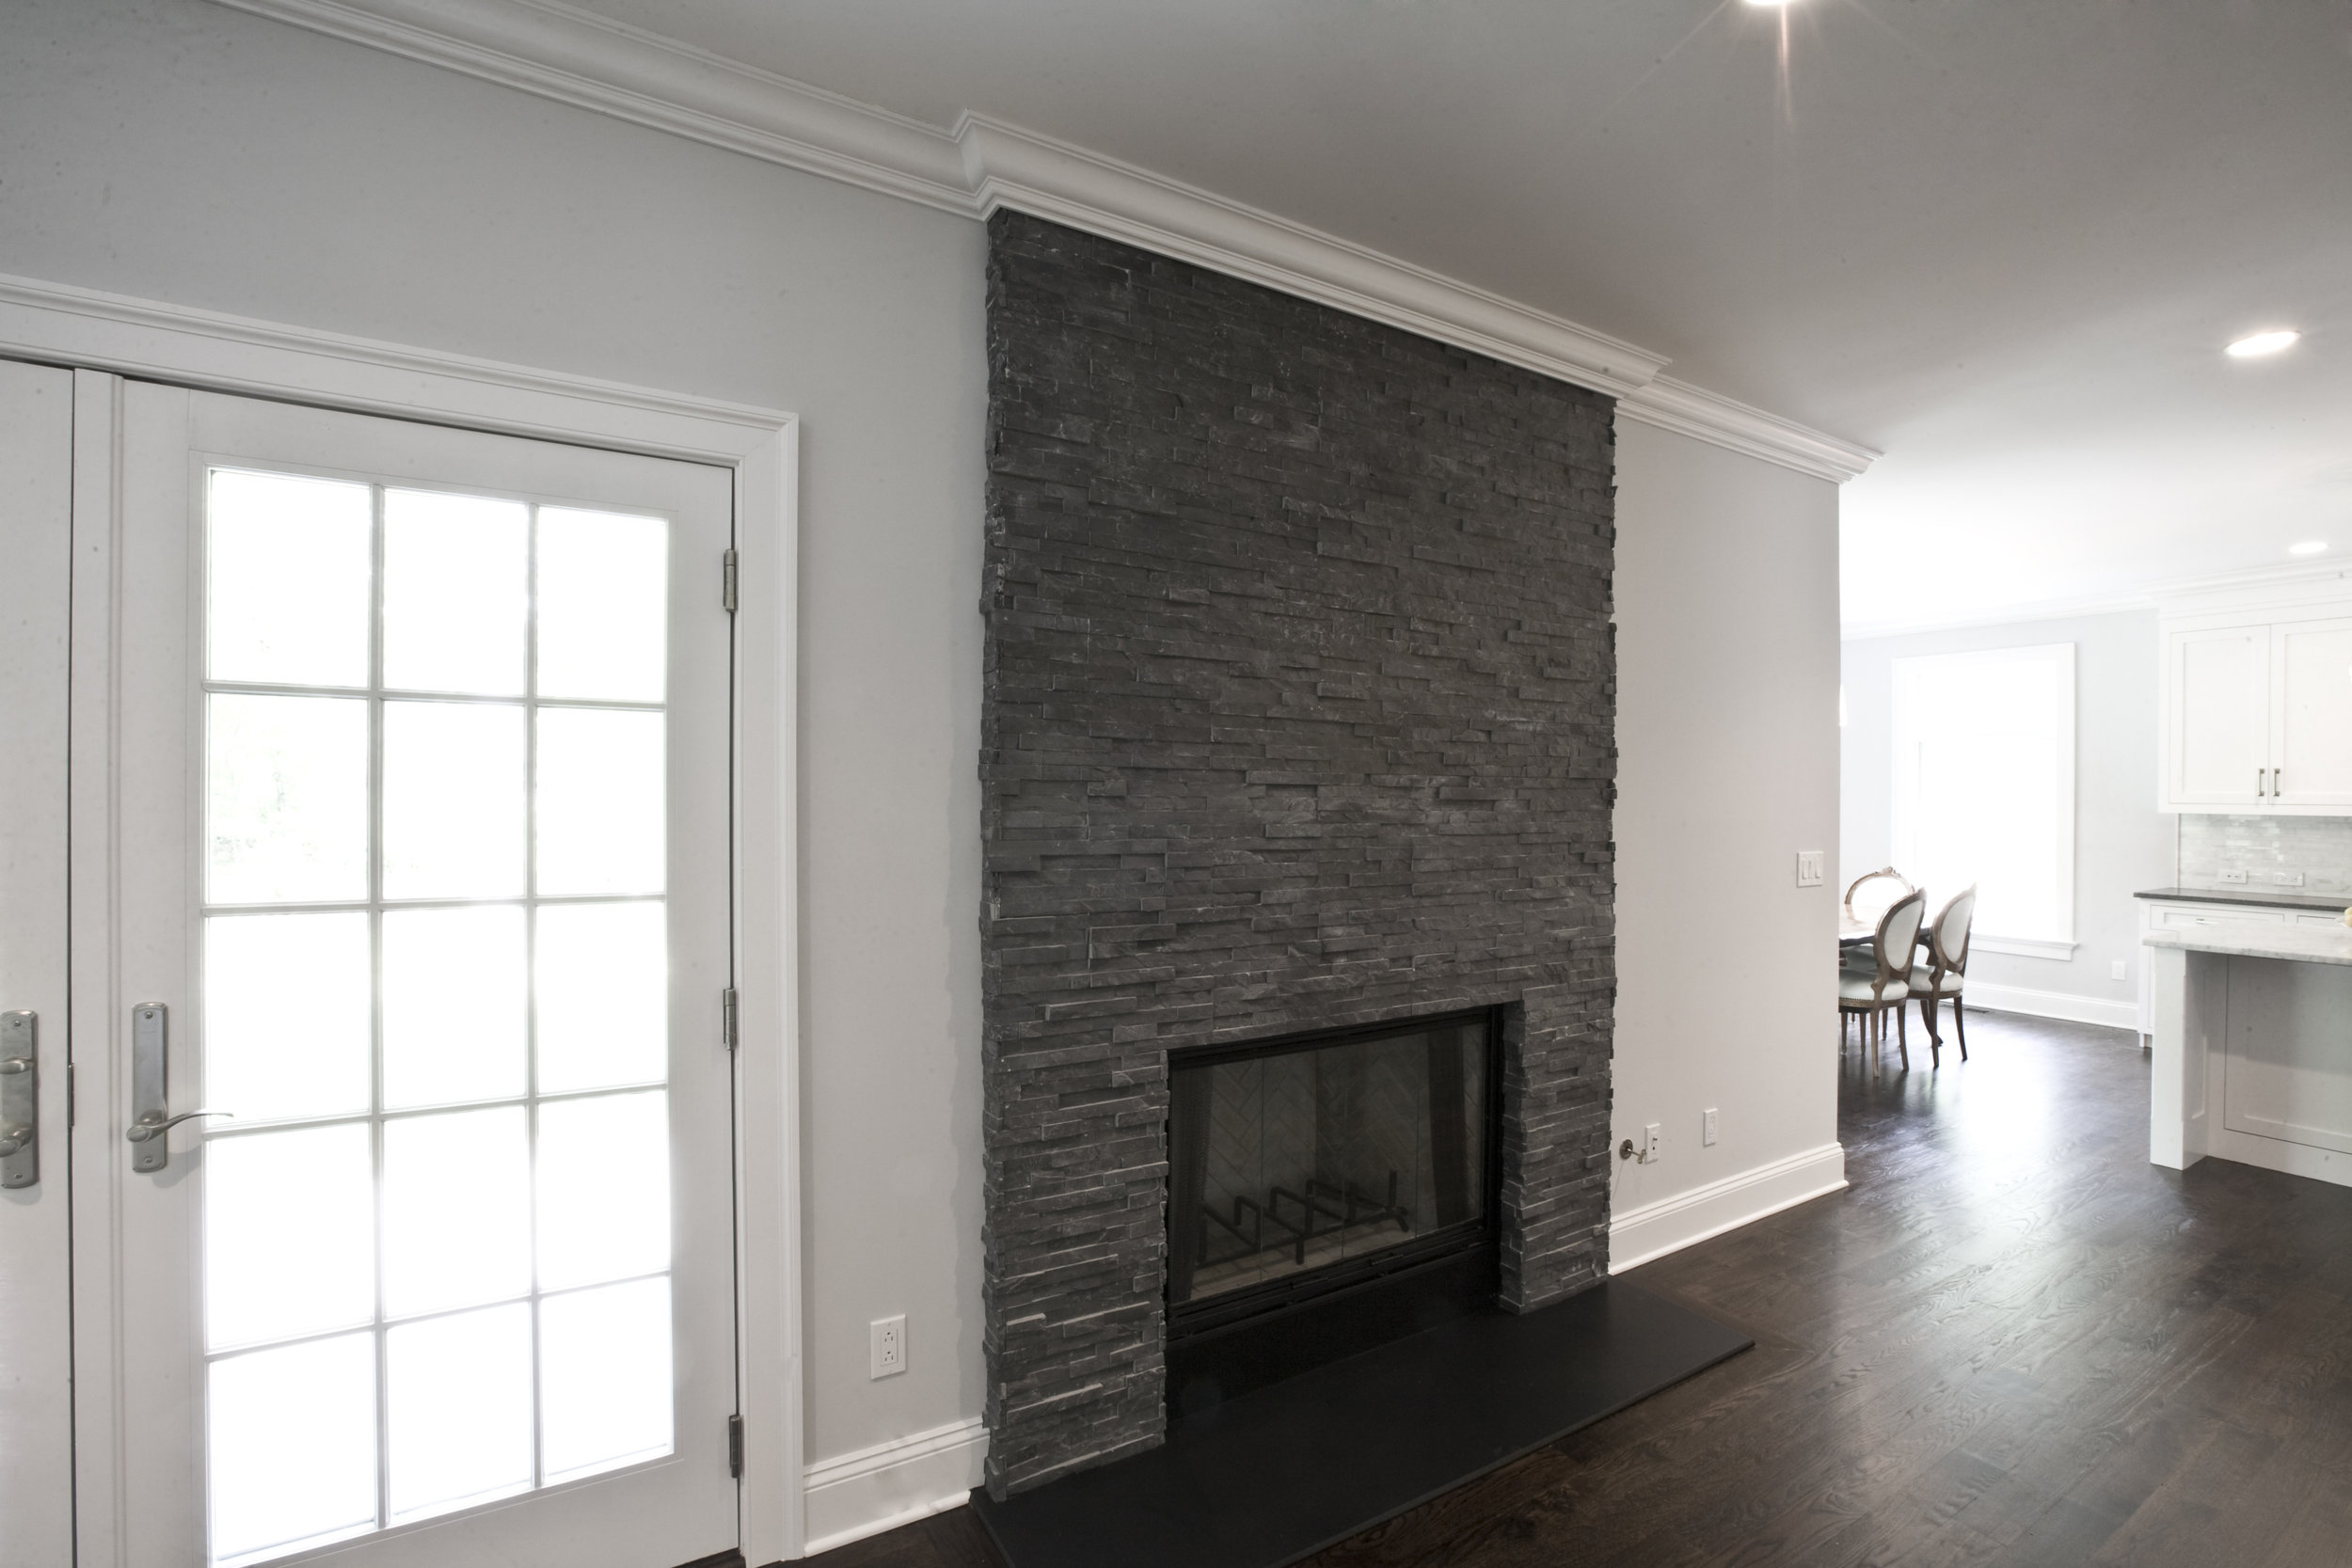  POLISHED BLACK ABSOLUTE GRANITE HEARTH AND CHARCOAL SHADOWSTONE BY REALSTONE 